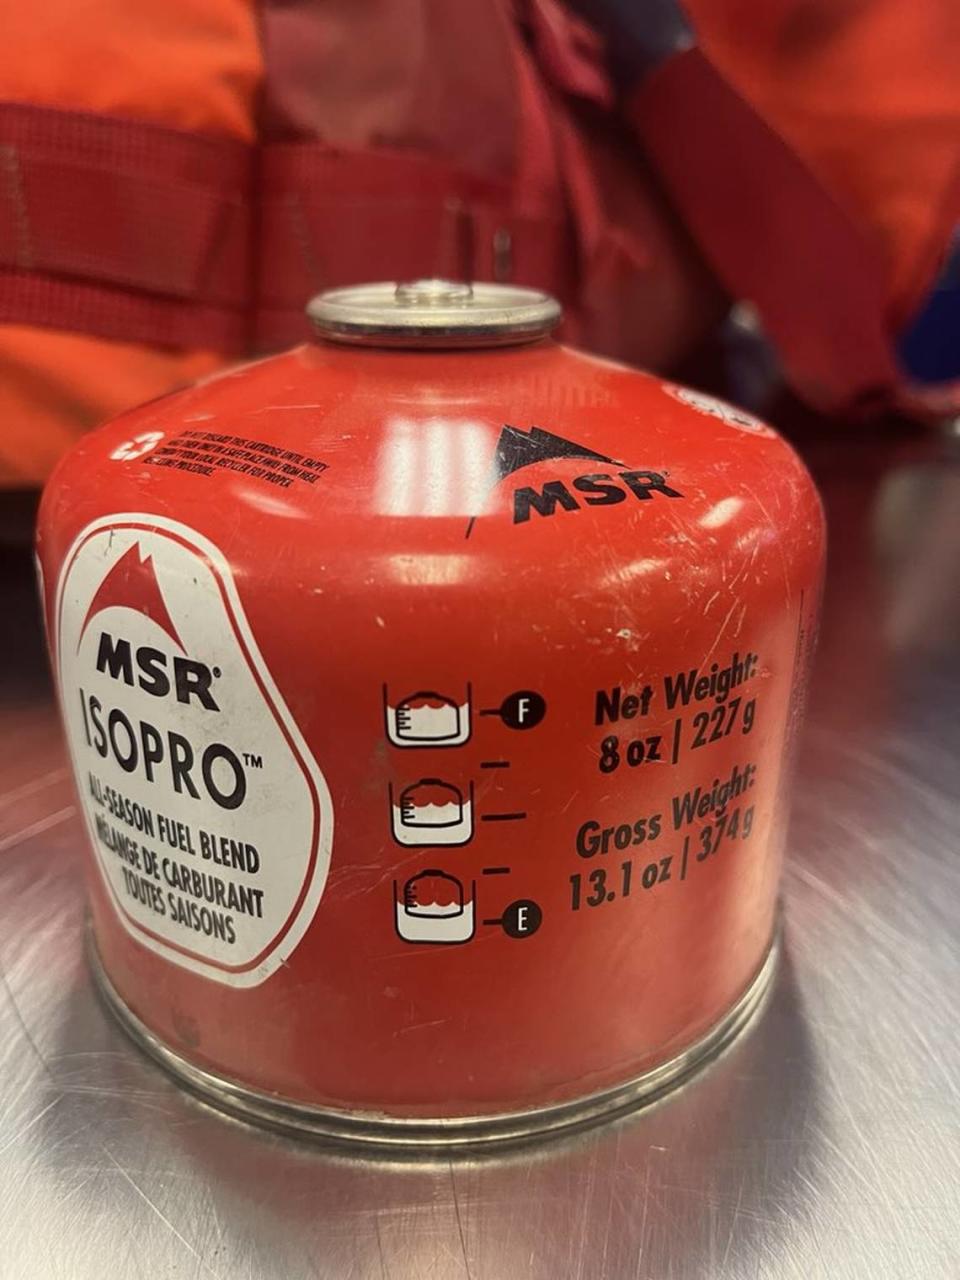 Multiple canisters of propane camping fuel have been discovered in checked luggage at the Boise Airport in recent days.